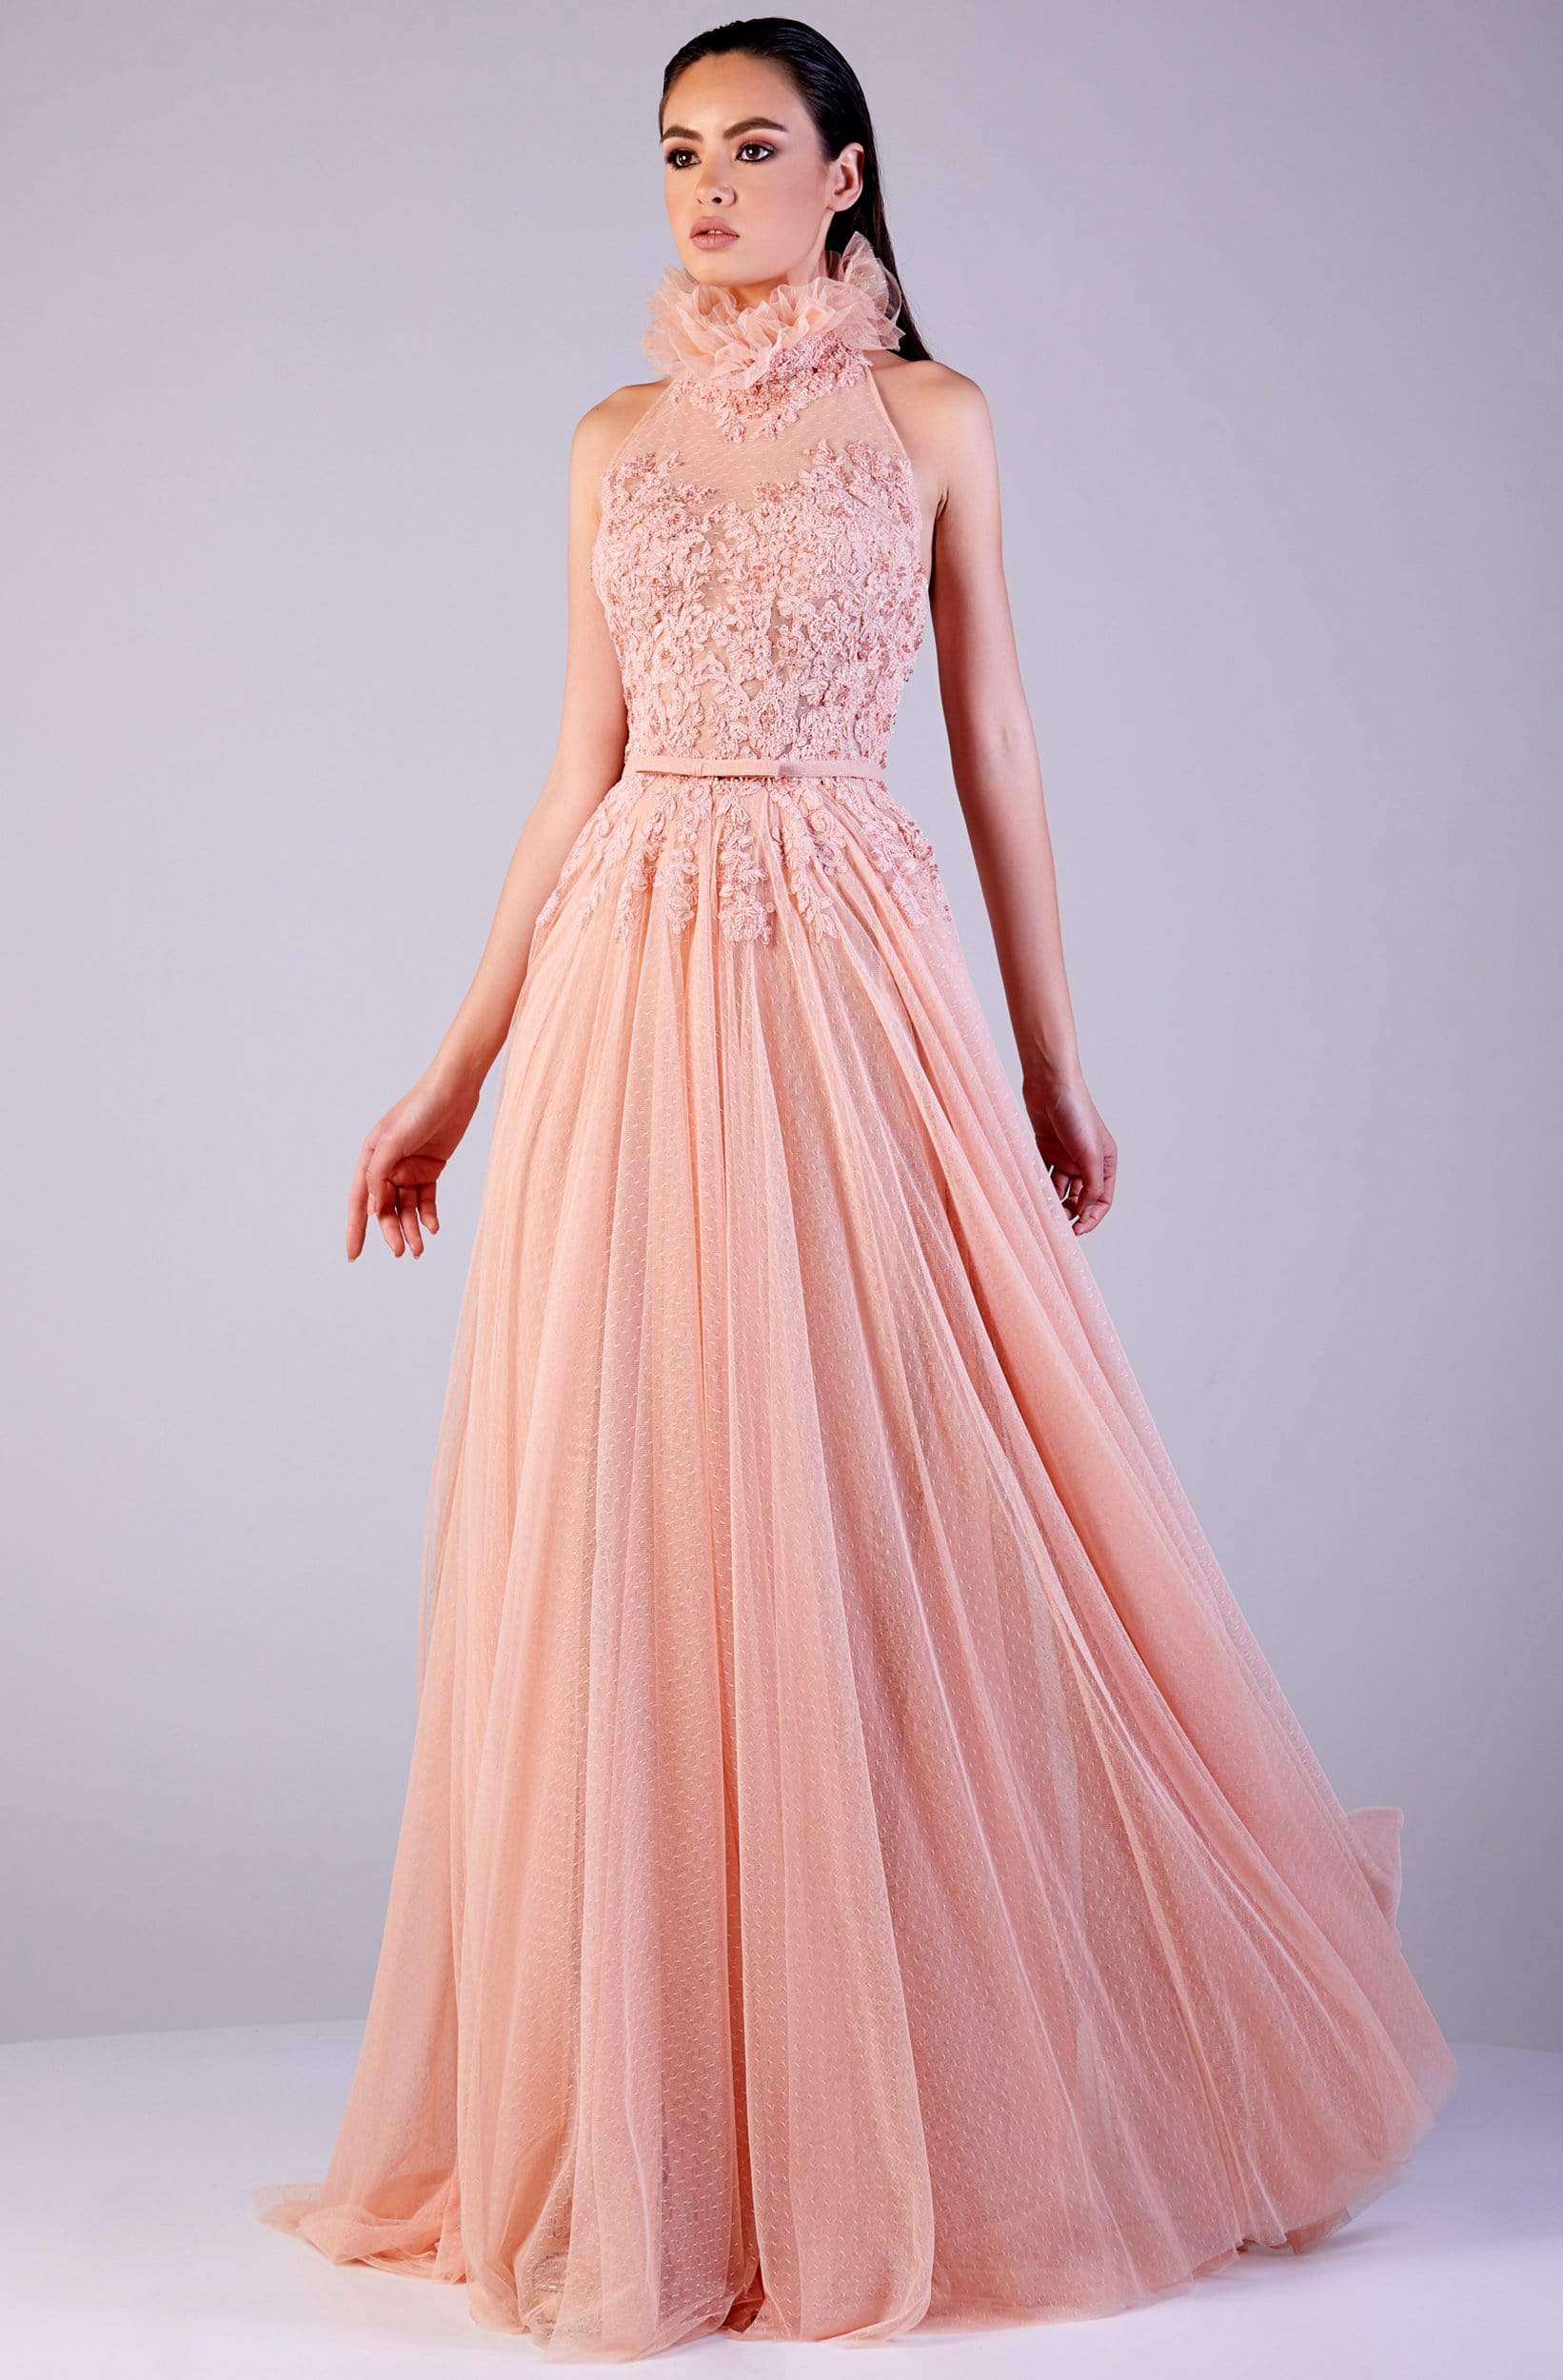 Image of Gatti Nolli Couture - OP-5202 Ruffled High Halter Lace Gown